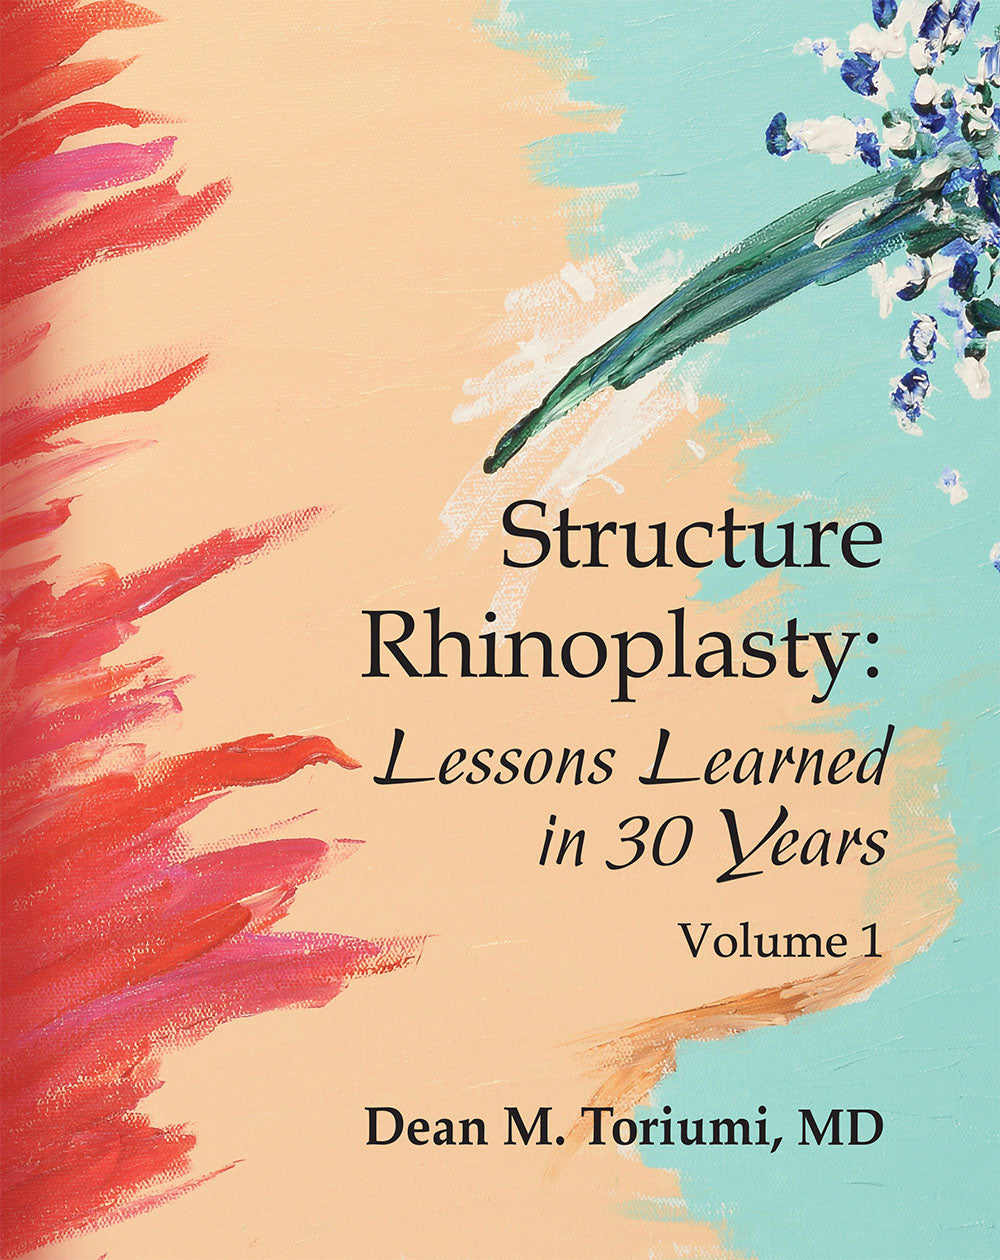 STRUCTURE RHINOPLASTY: LESSONS LEARNED IN 30 YEARS